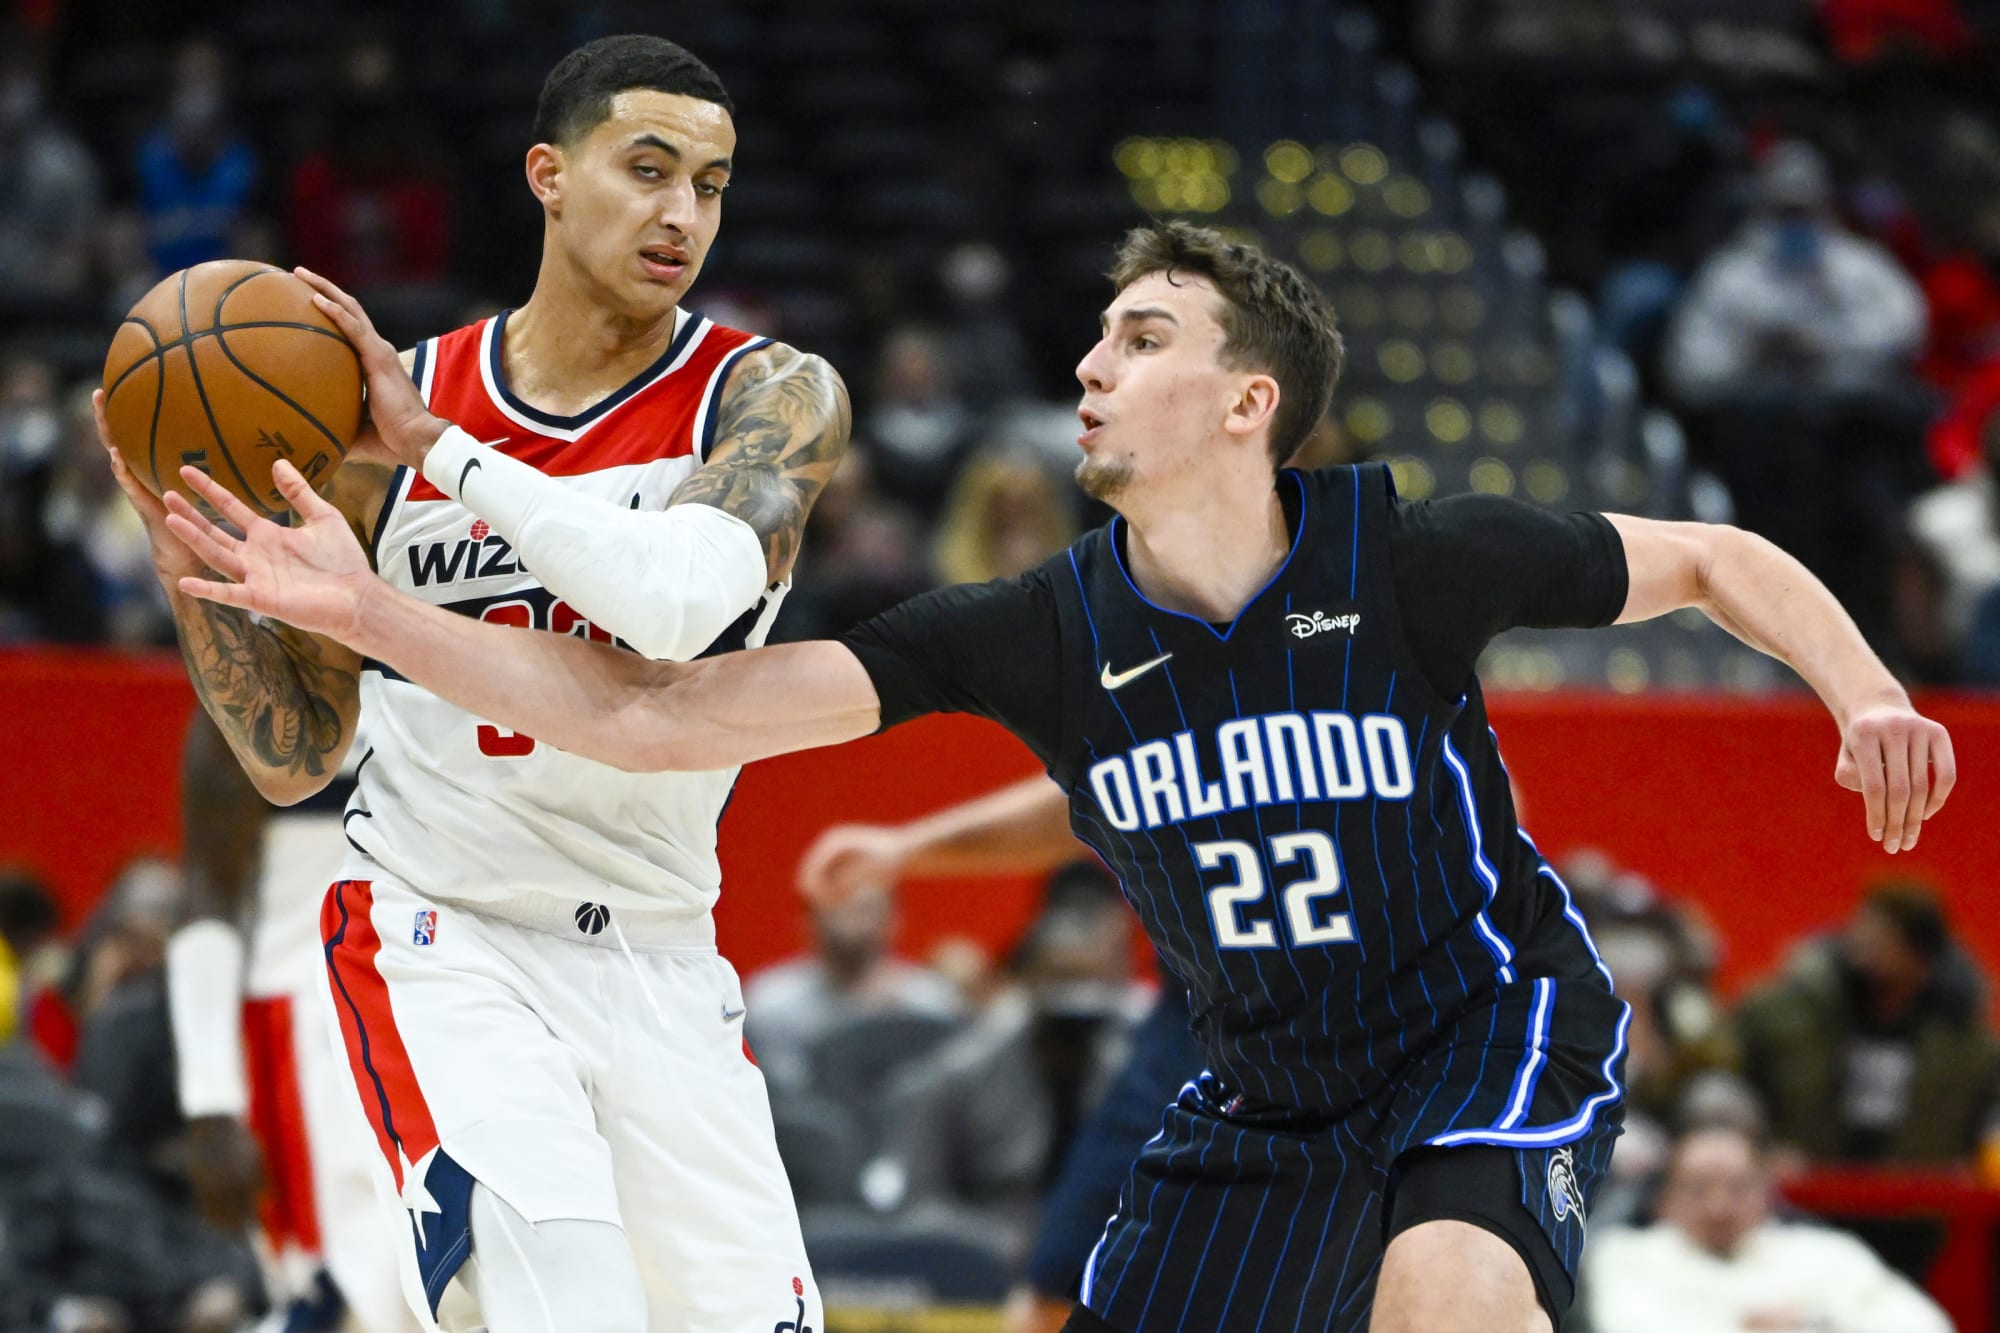 Orlando Magic have some proof, but plenty to build on defense